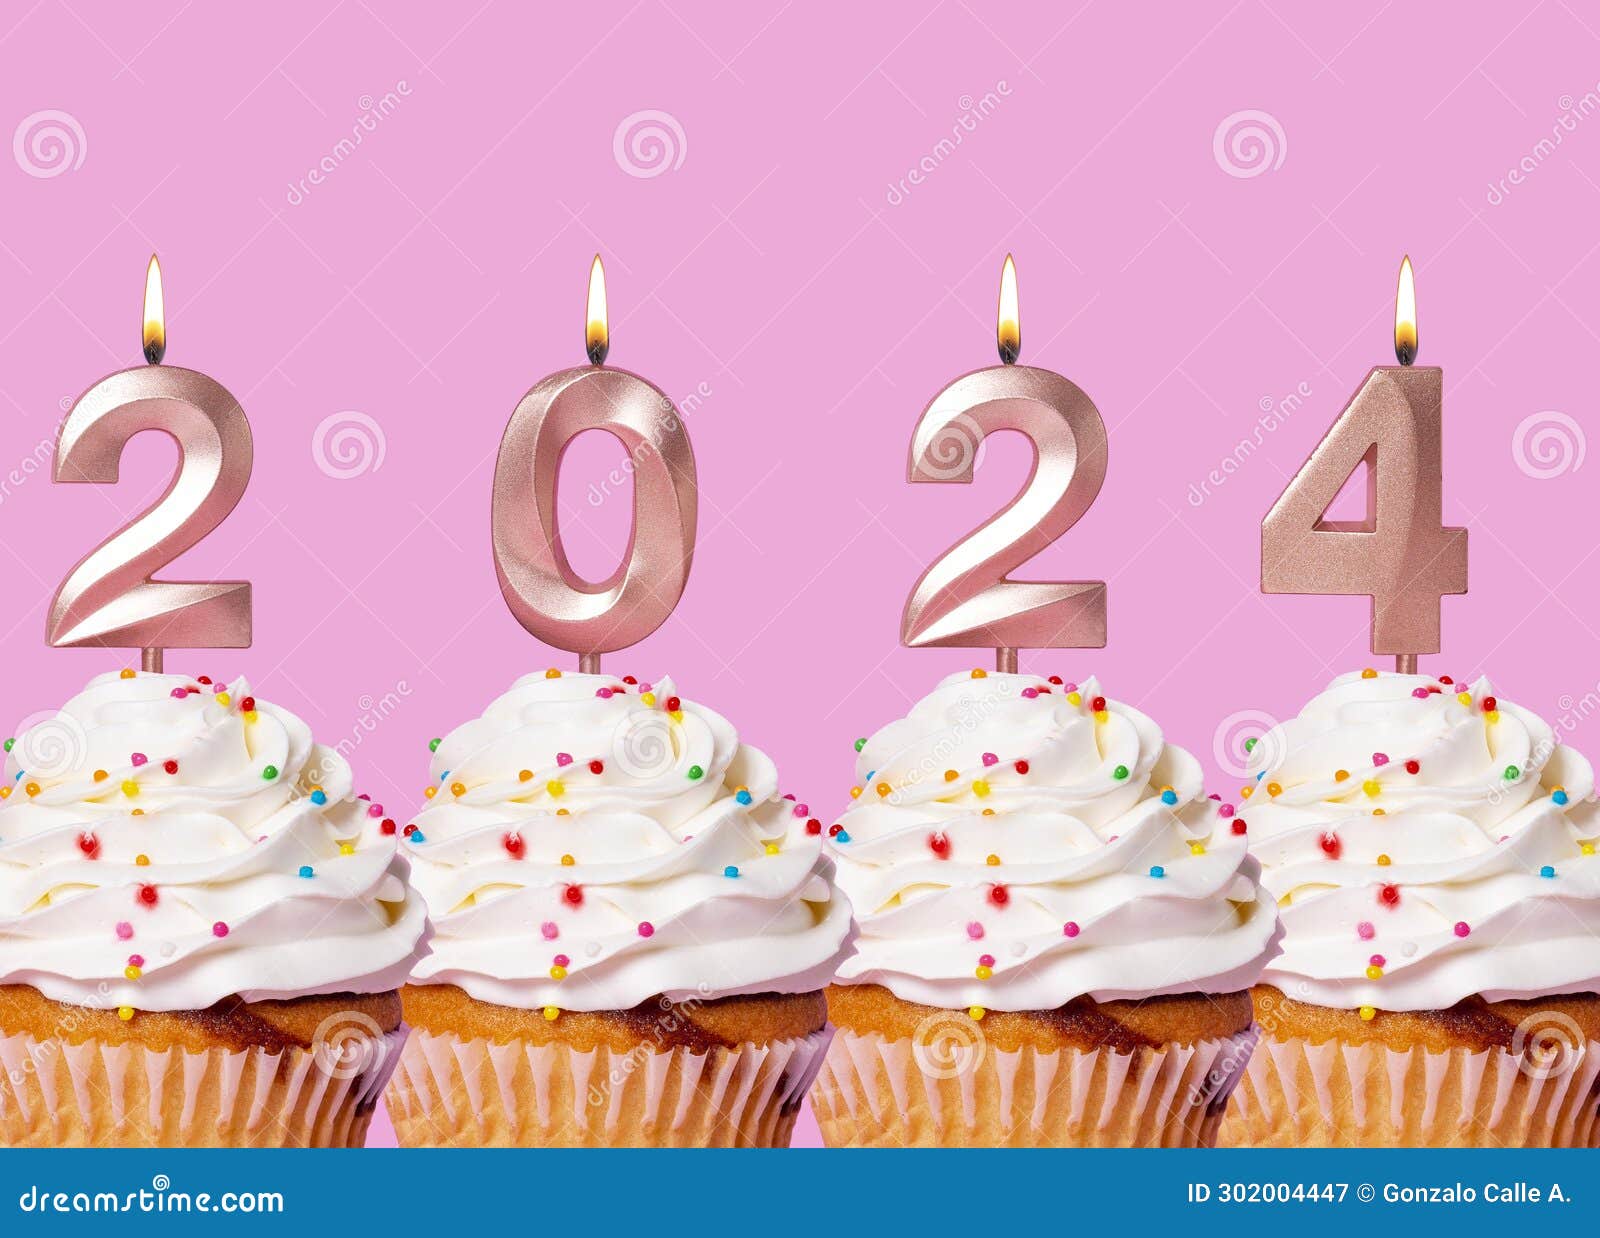 Cupcake with Candles Forming Number 2024 for Happy New Year New Year